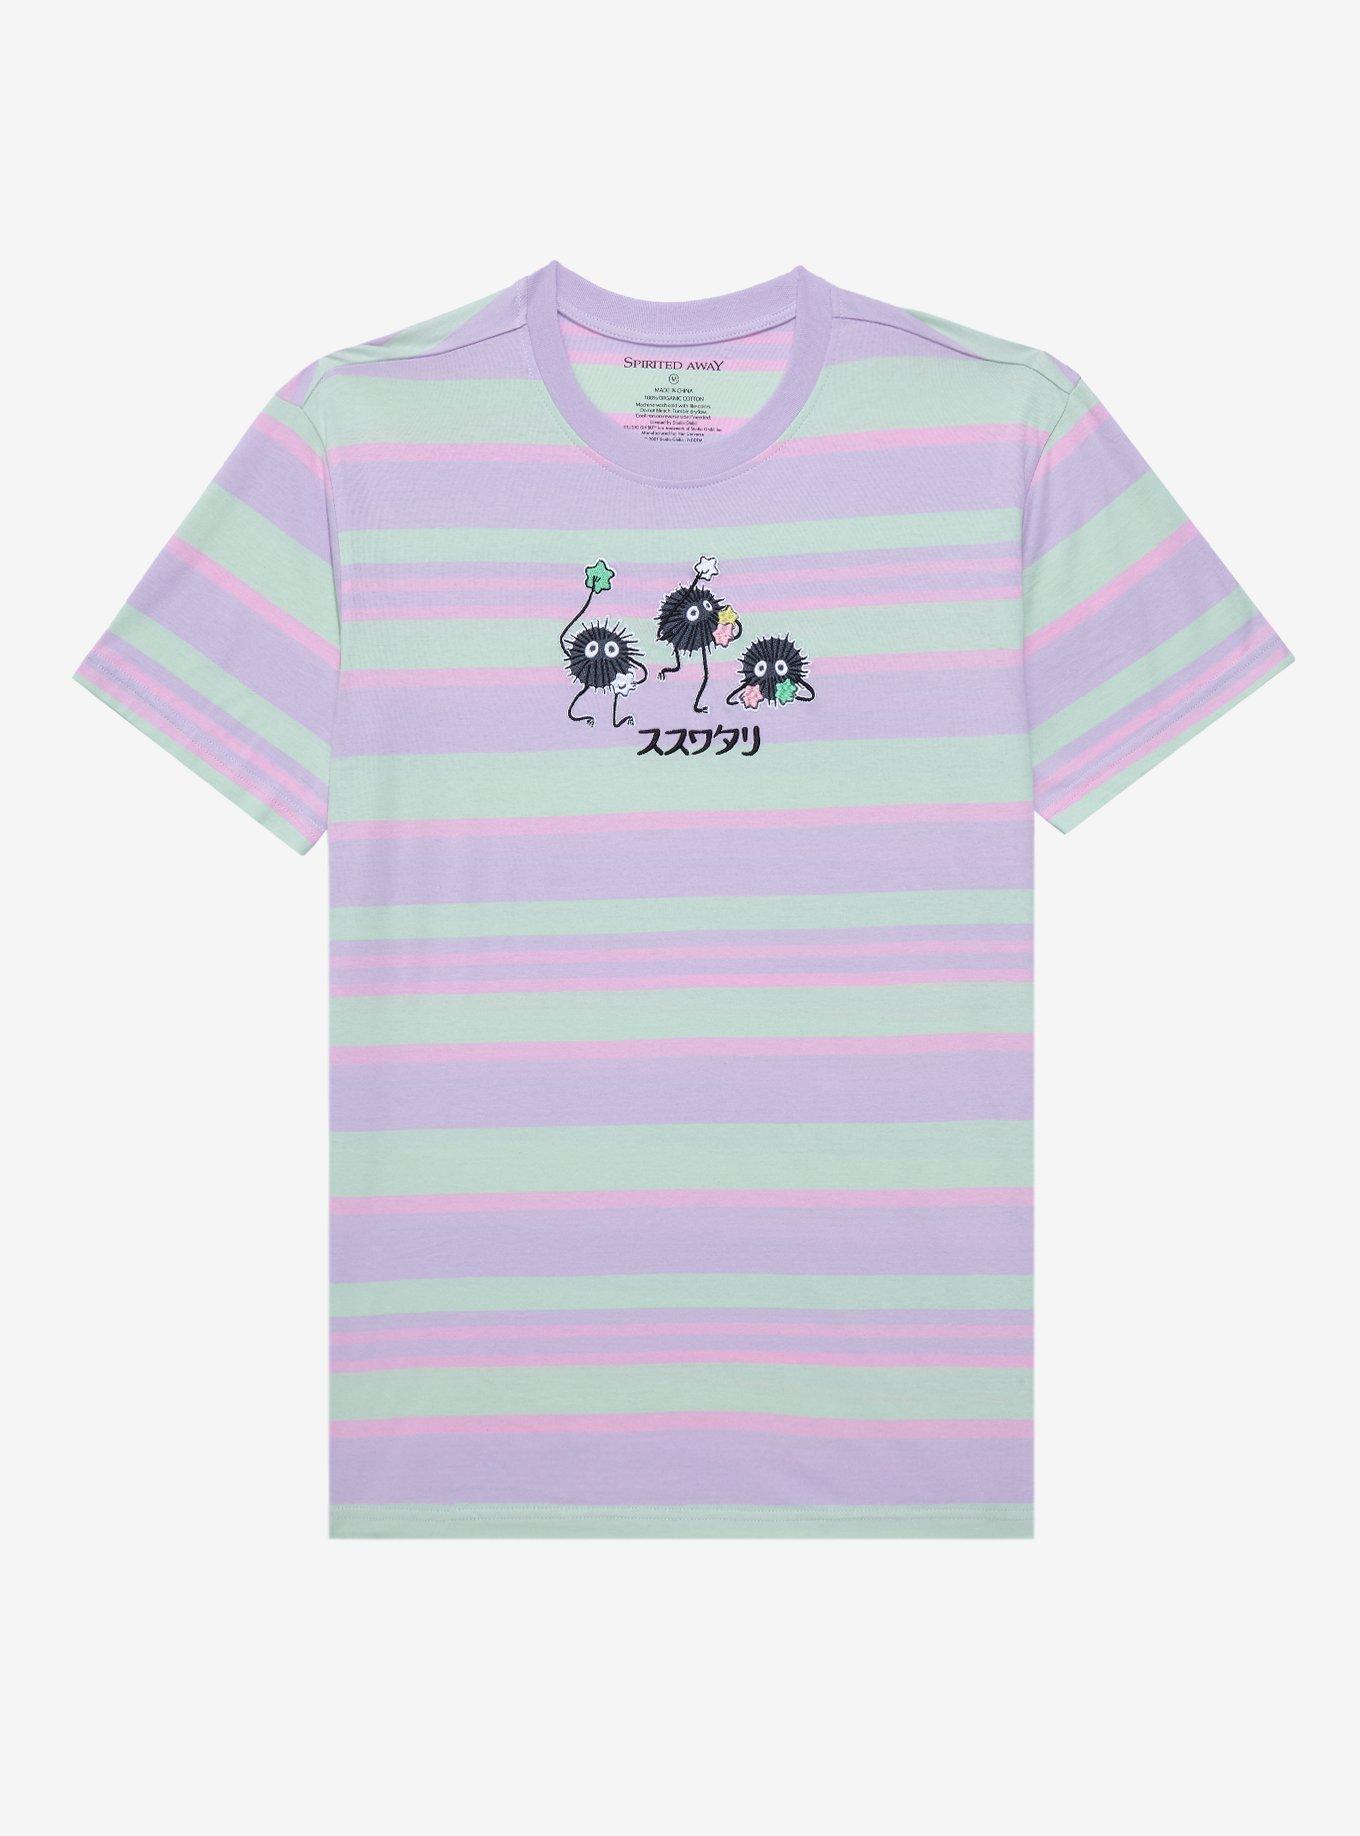 Studio Ghibli Spirited Away Soot Sprites Embroidered Striped T-Shirt - BoxLunch Exclusive, MULTI STRIPE, hi-res